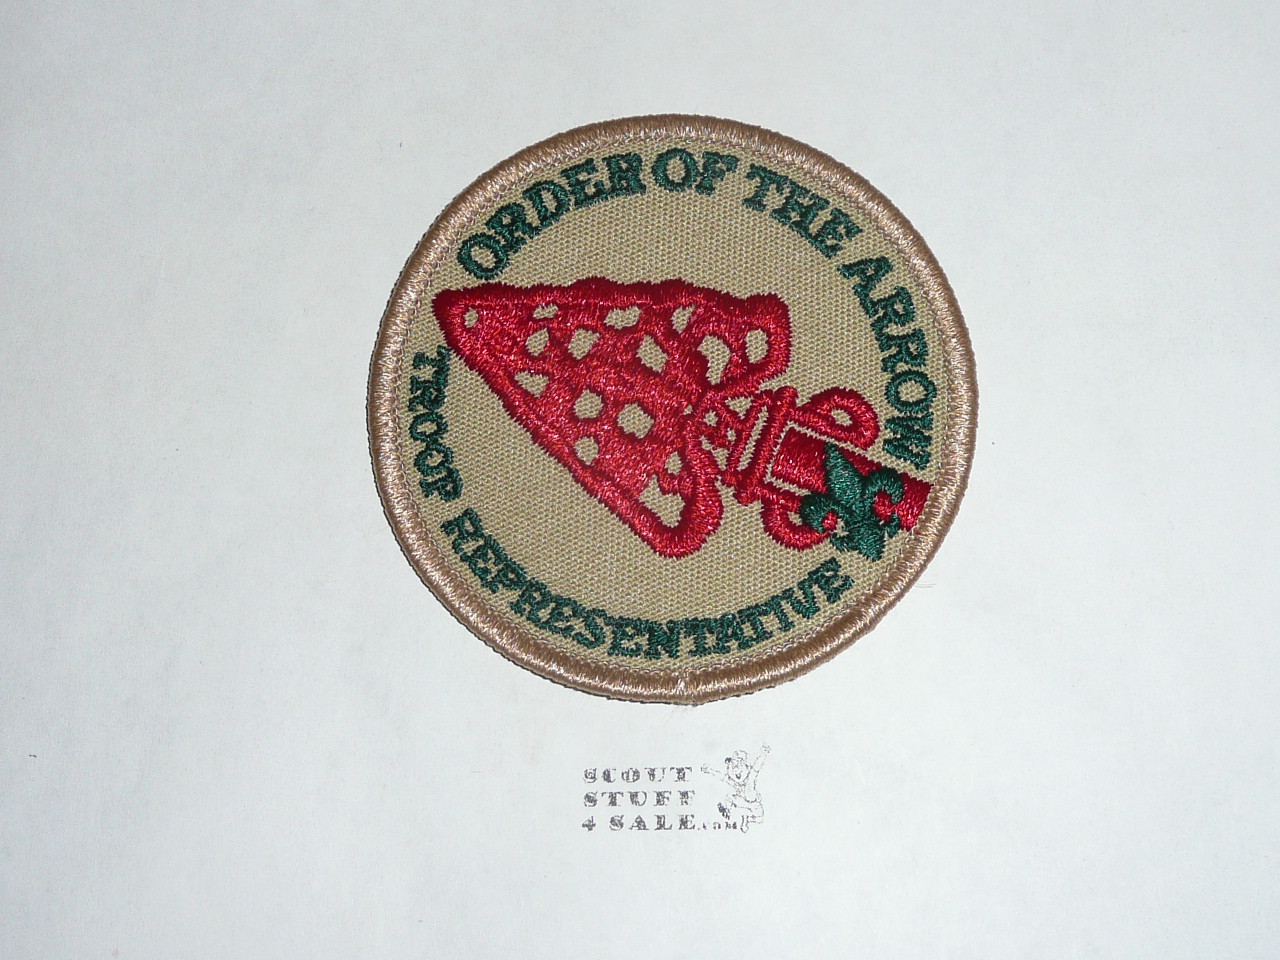 Order of the Arrow Troop Representitive Patch, 1989 - Present